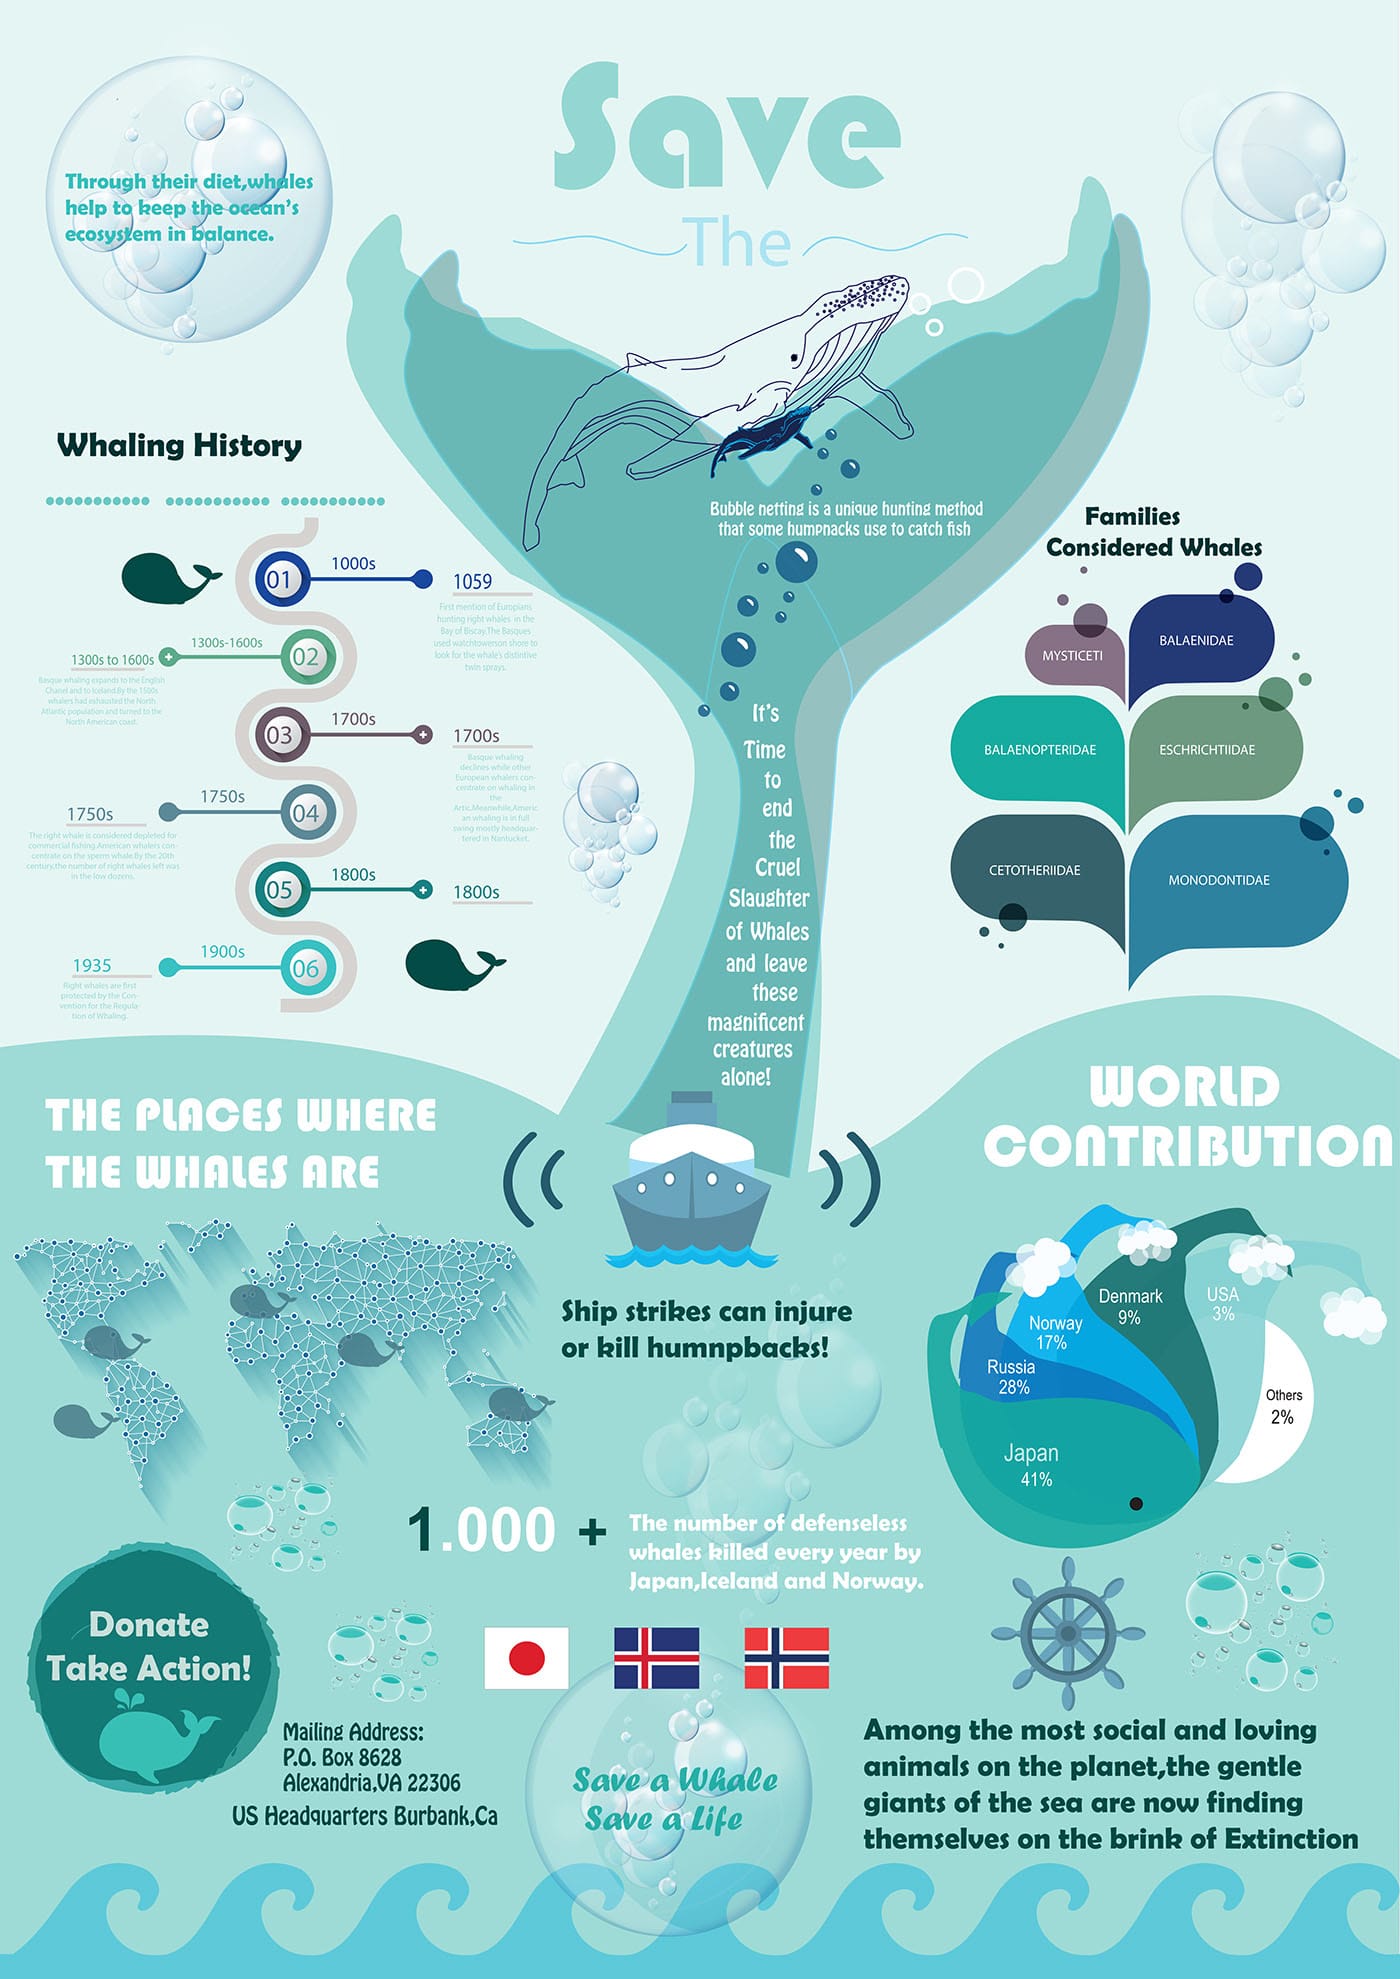 An infographic showing the importance of whale conservation